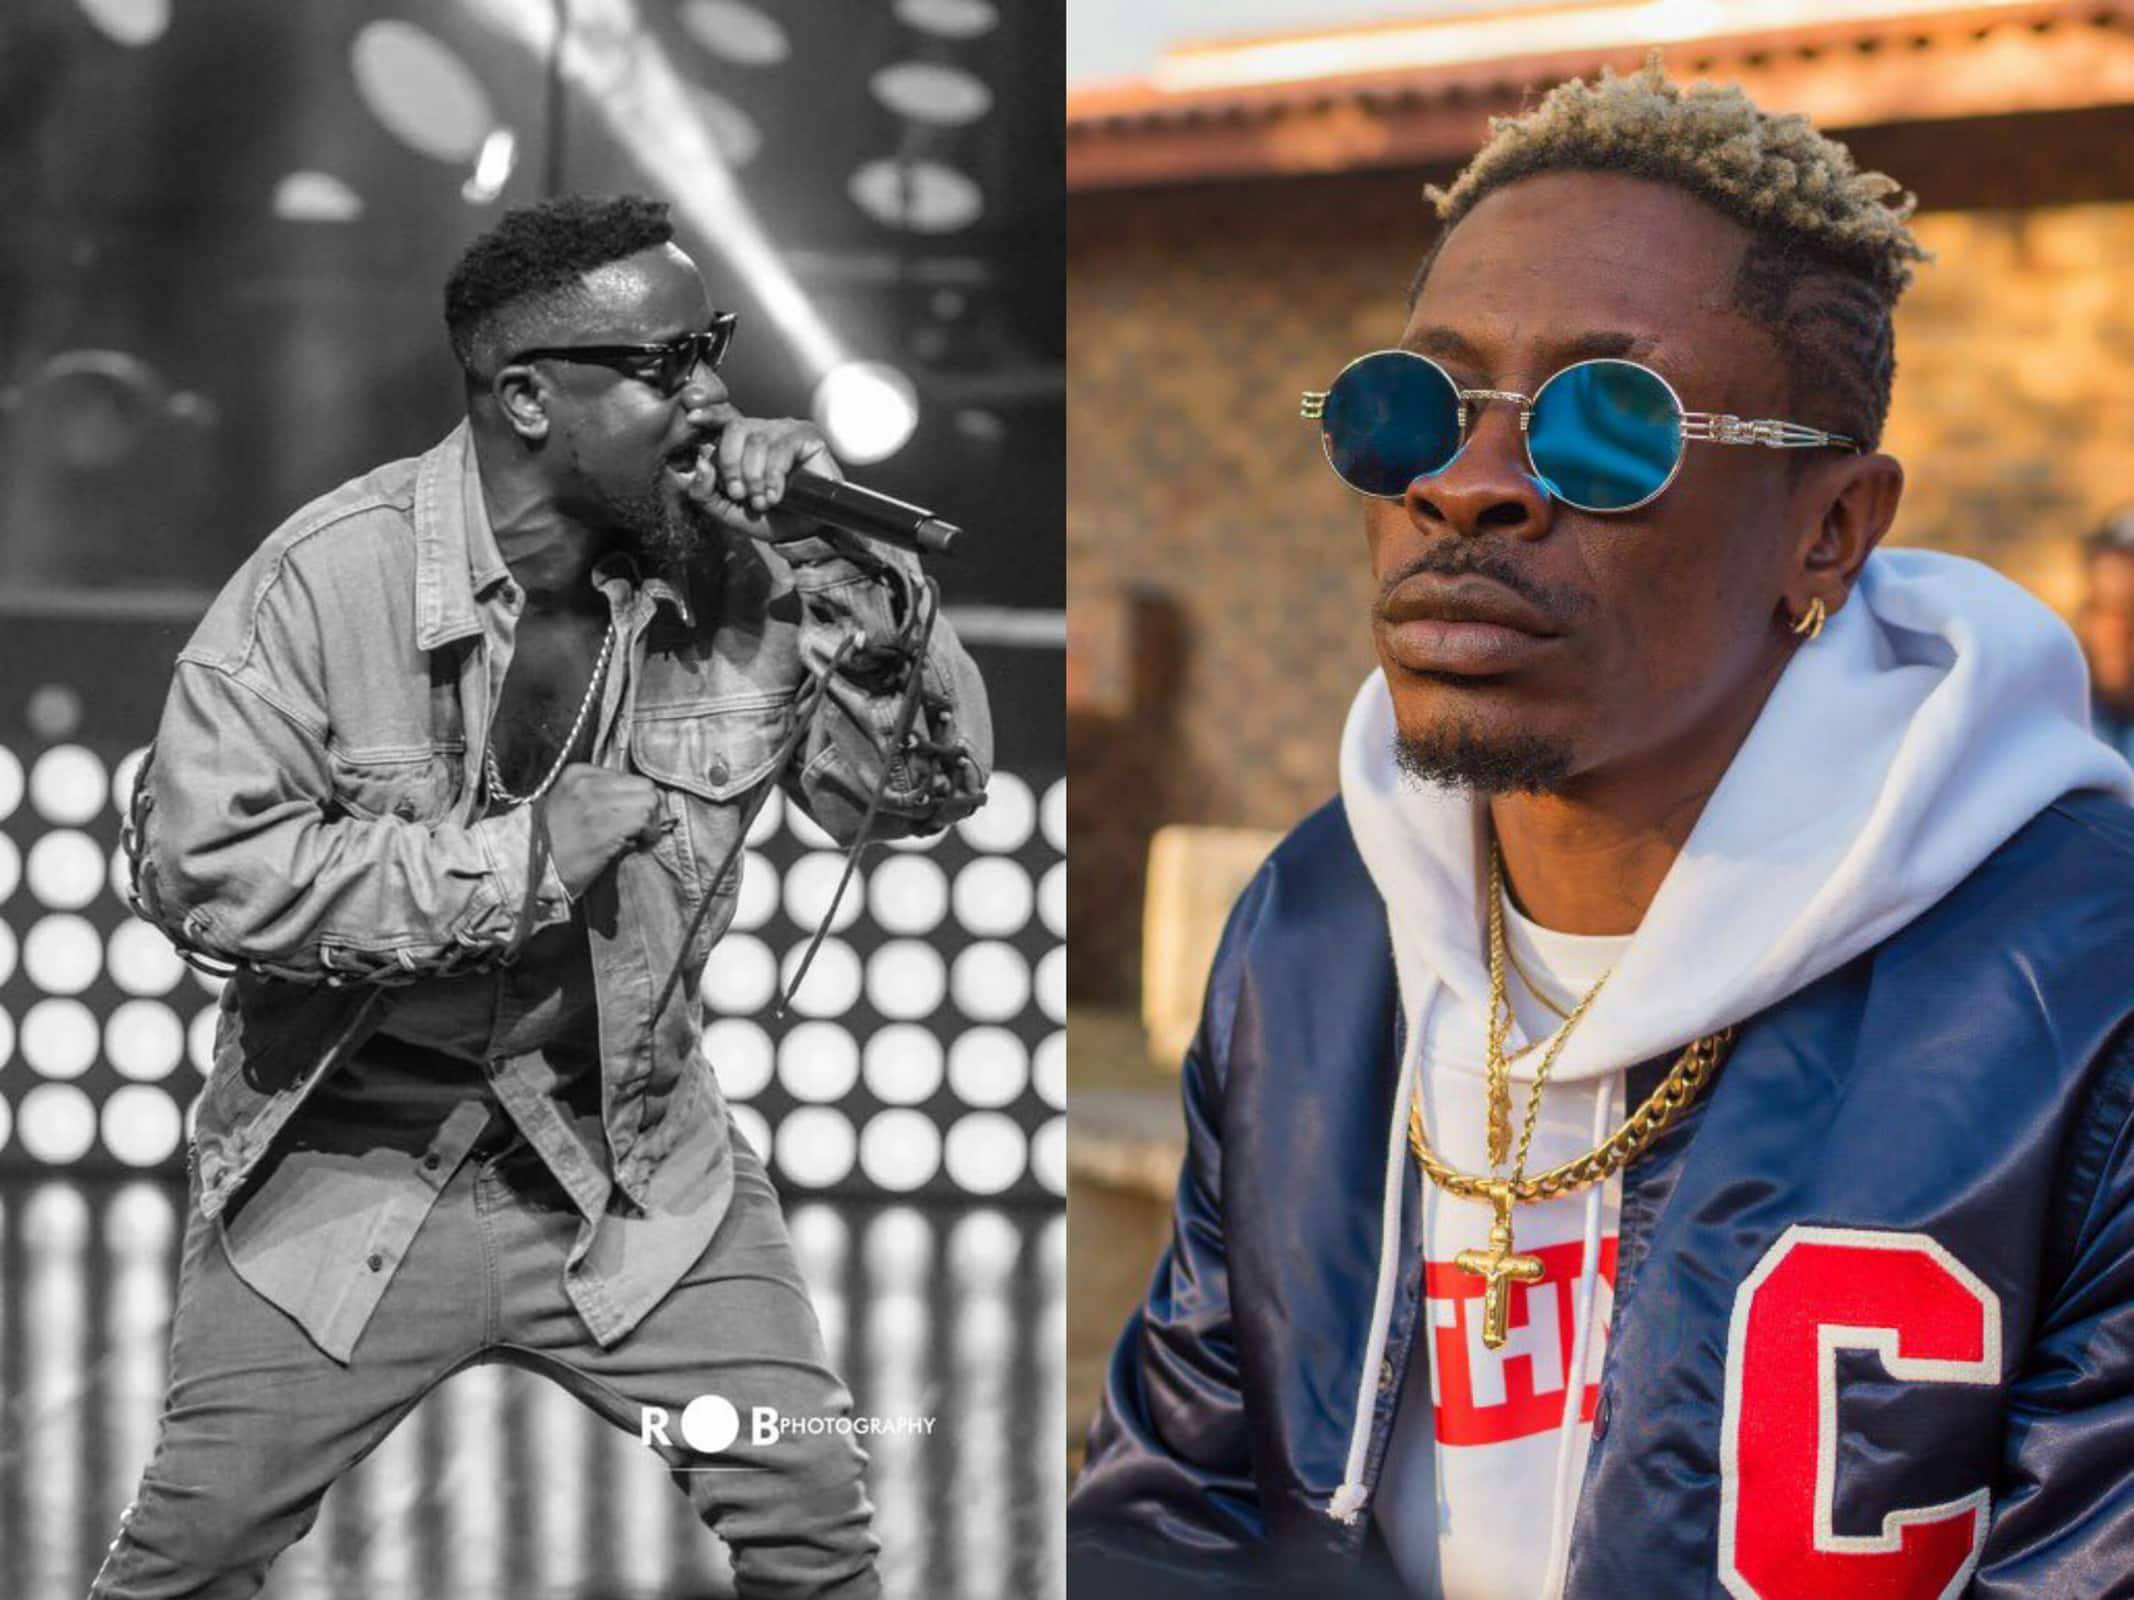 VIDEO: Shatta Wale finally shows 'Buttocks' as Sarkodie predicted